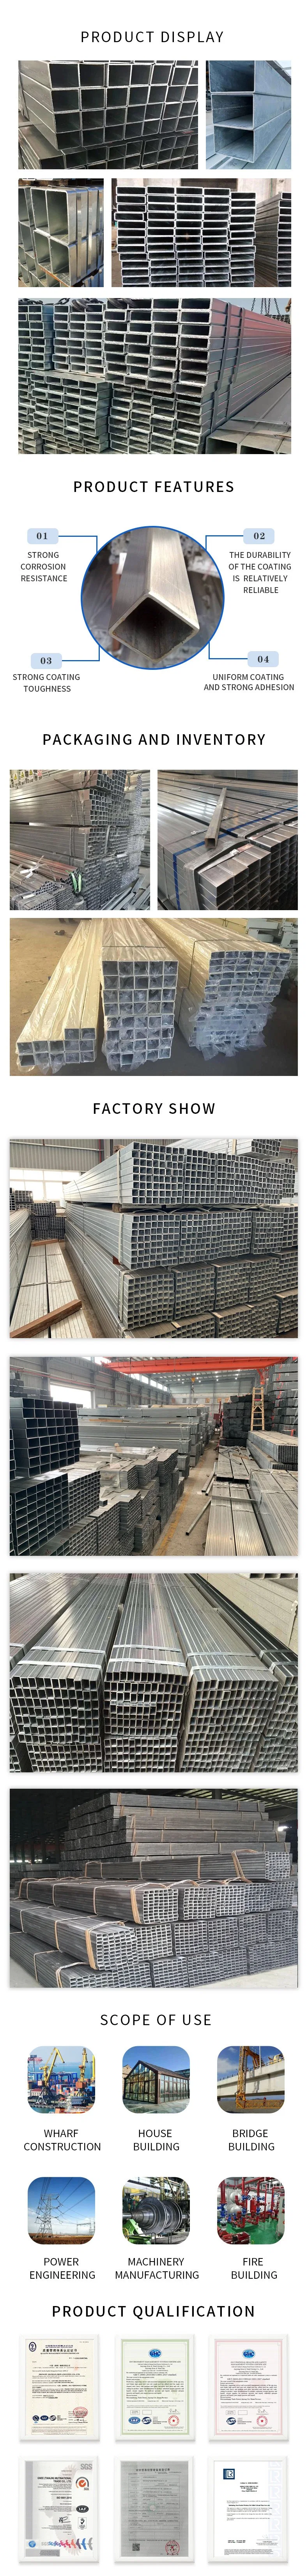 ASTM Standard St37 Hollow Tube Square 2.5 Inch Galvanized Steel Tubing Hot DIP Galvanized Square Pipe